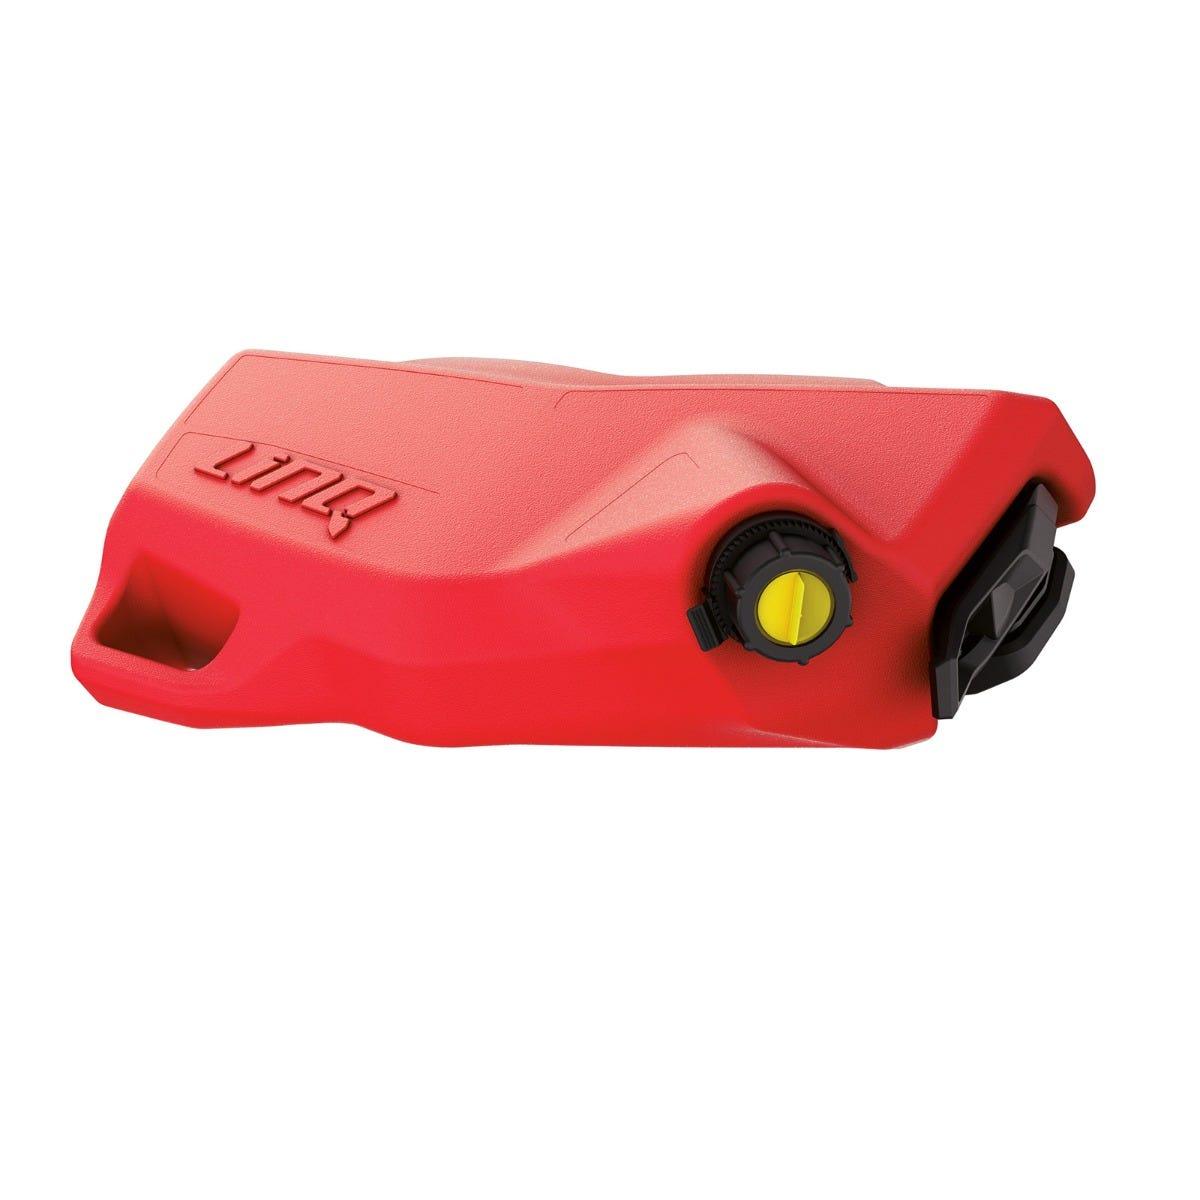 LinQ Fuel Caddy Red - 1 gallon